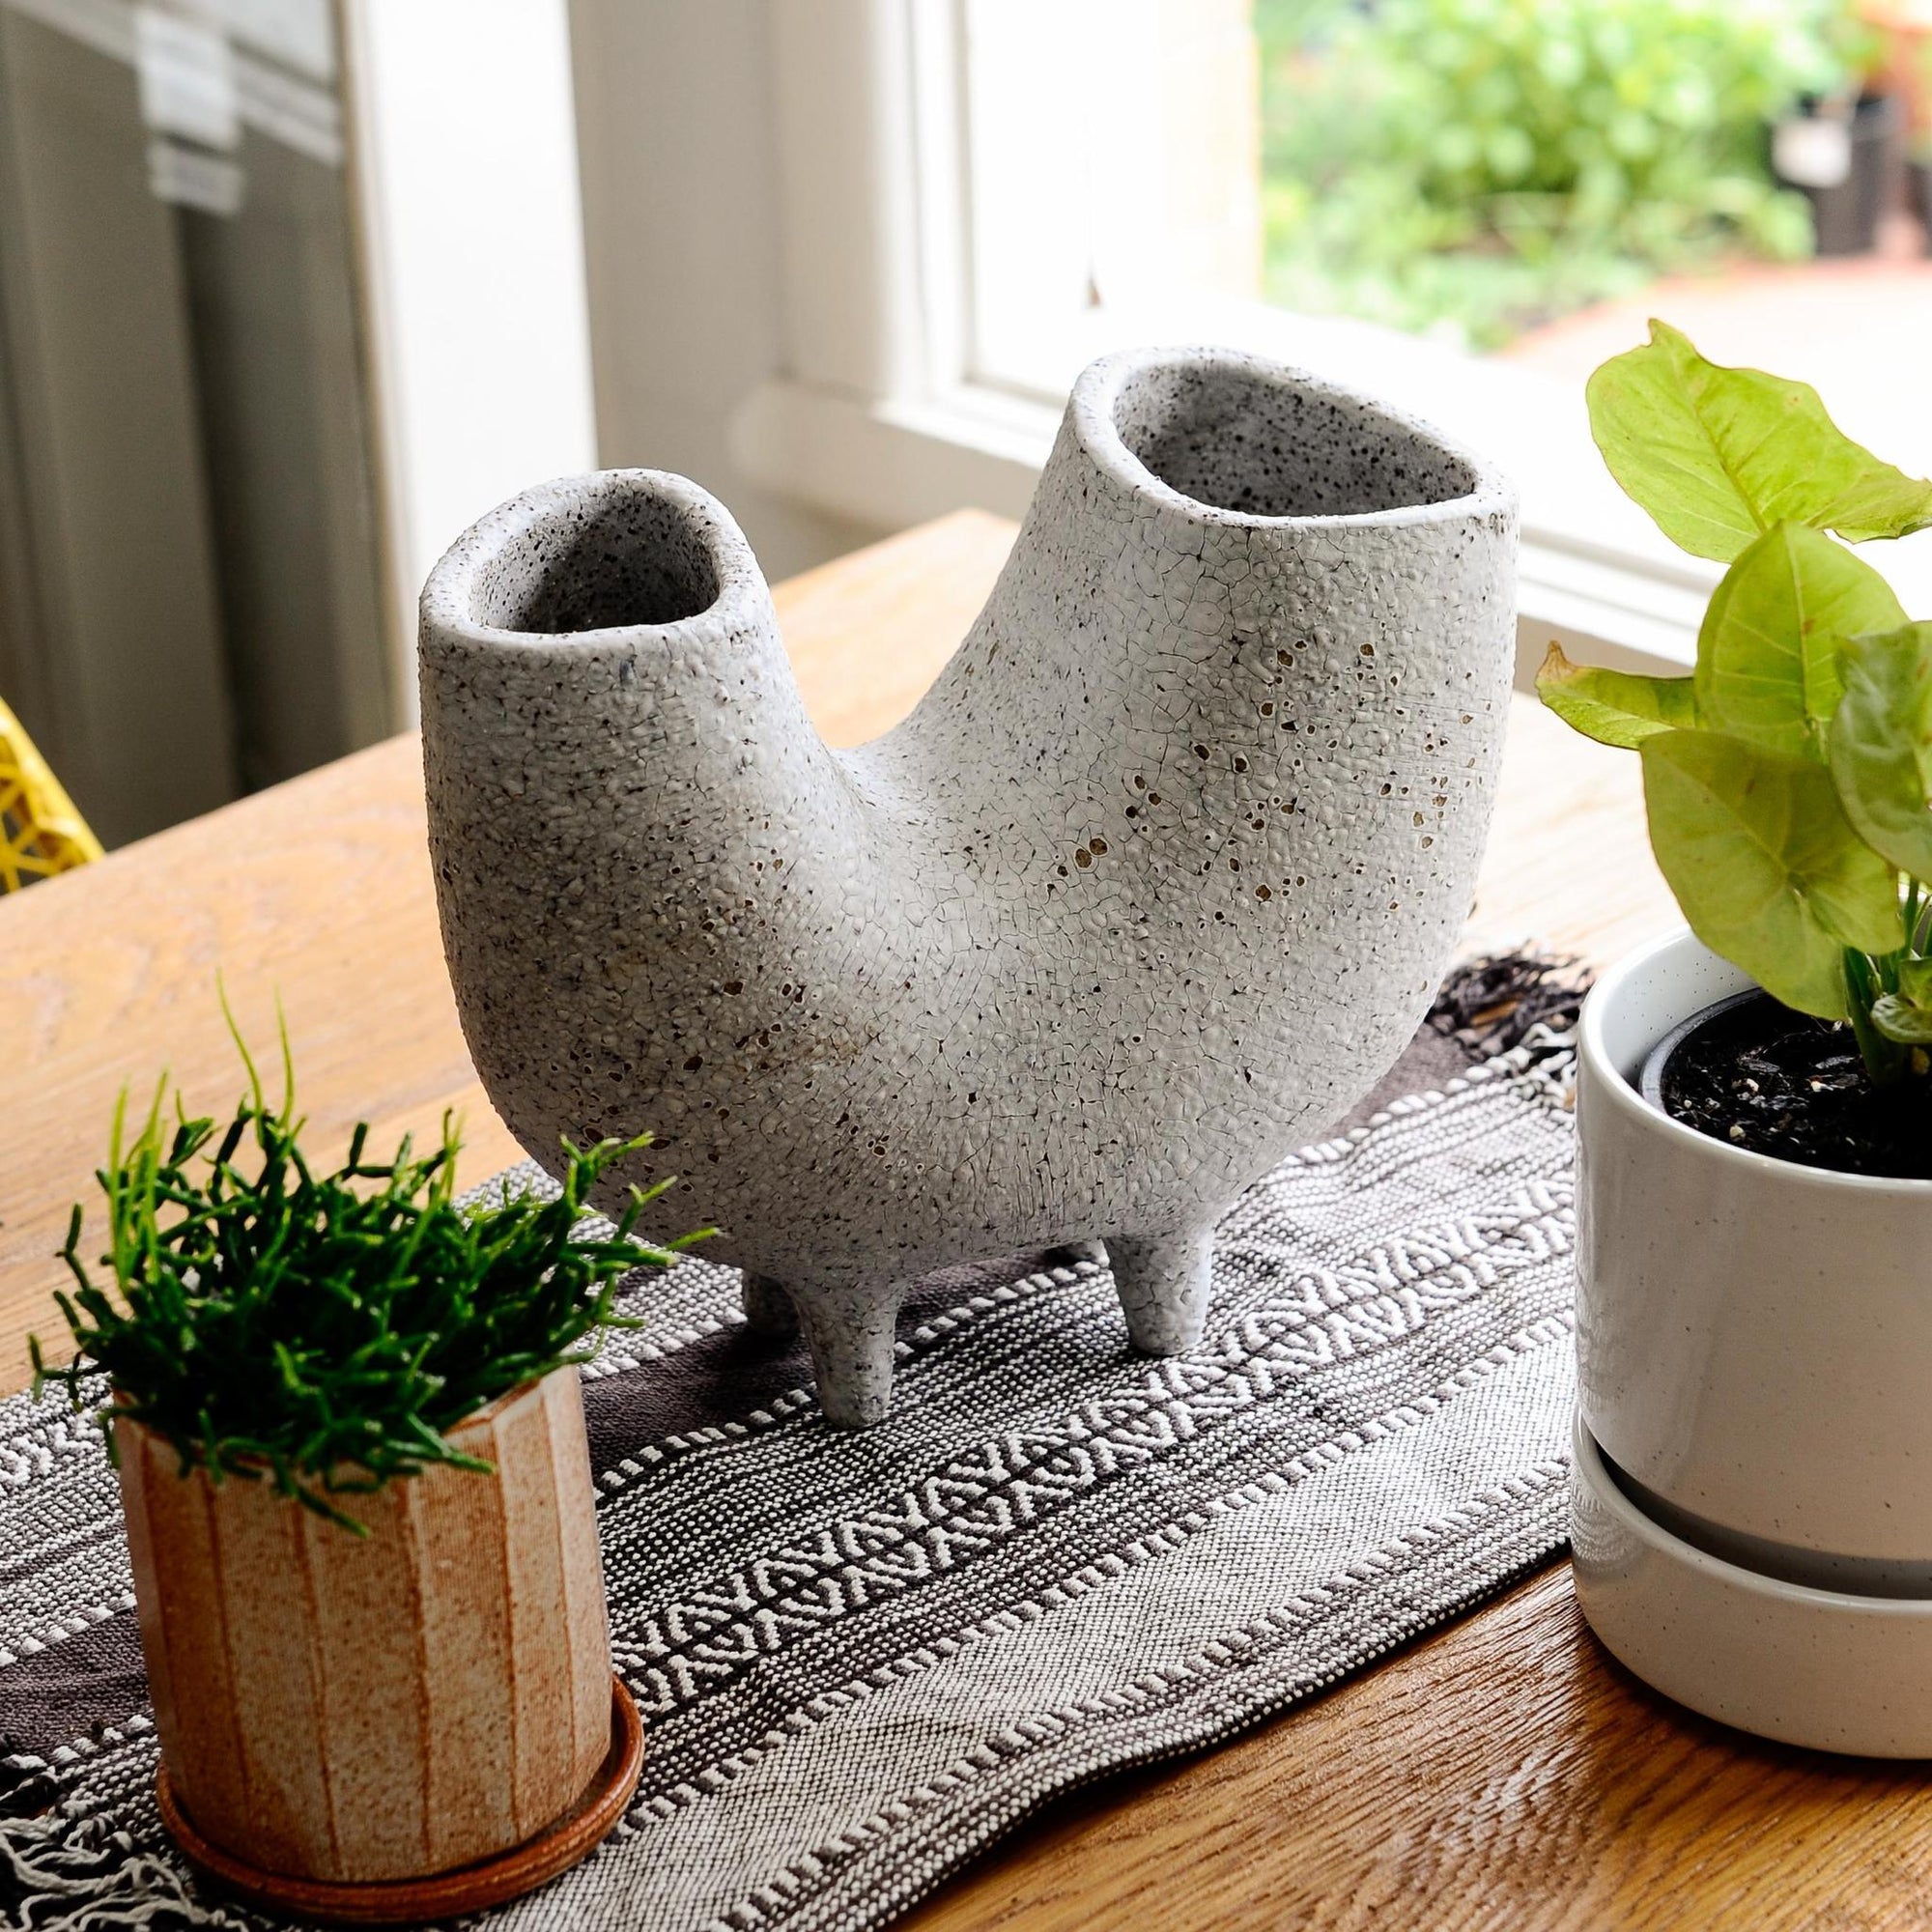 Del Fango Planter by Buzzby &amp; Fang - THE PLANT SOCIETY